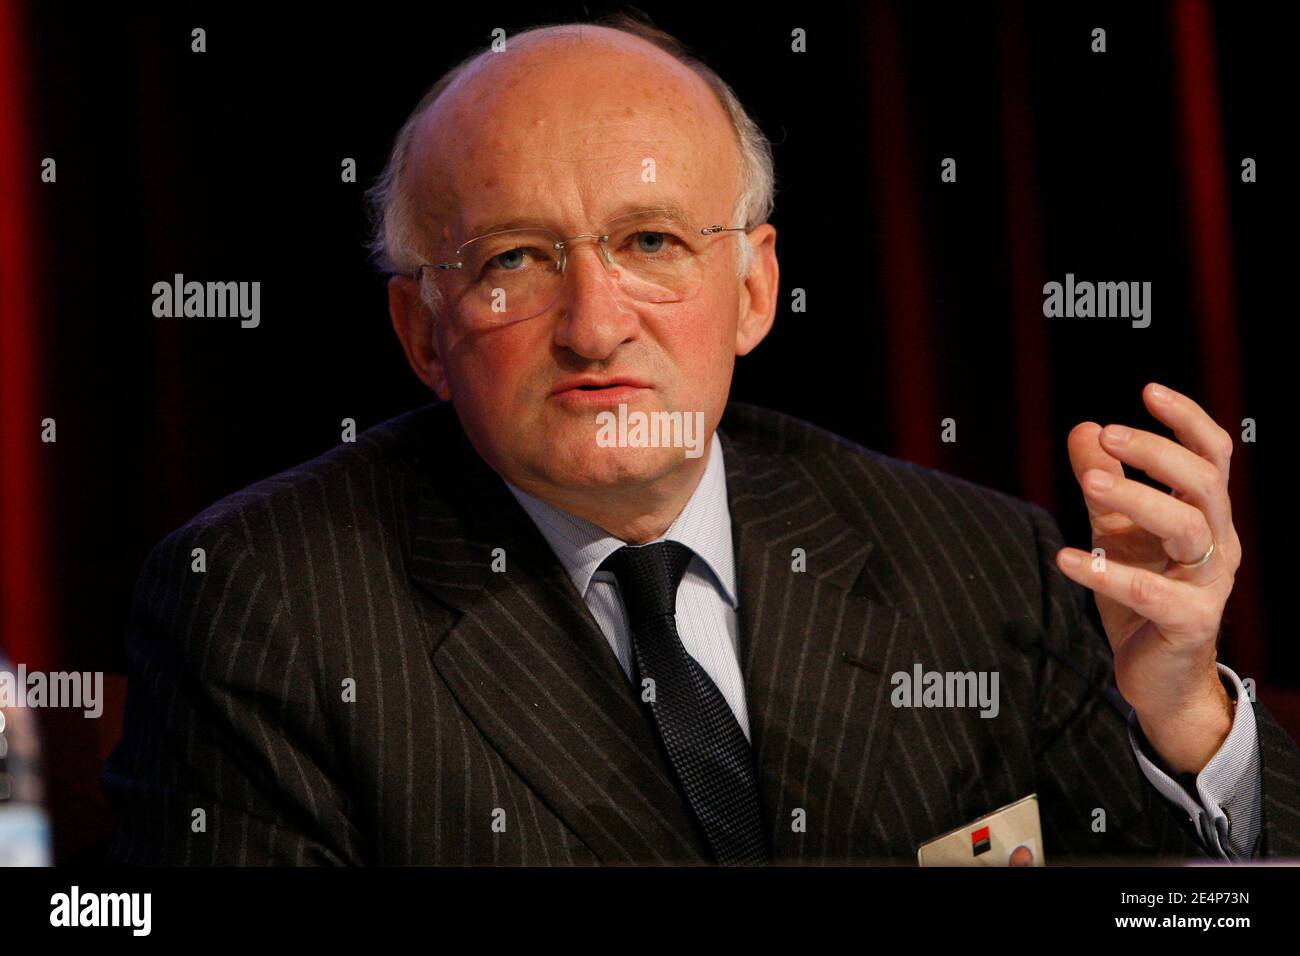 French banking group Societe Generale CEO Daniel Bouton during a press conference, January 24, 2008 in La Defense, near Paris, France. Trading in shares of Societe Generale was supended, January 24, 2008, after the French banking giant announced a sole trader was responsible for racking up 4.9 billion euros (7.15 billion dollars) in losses. Photo by Thierry Orban/ABACAPRESS.COM Stock Photo